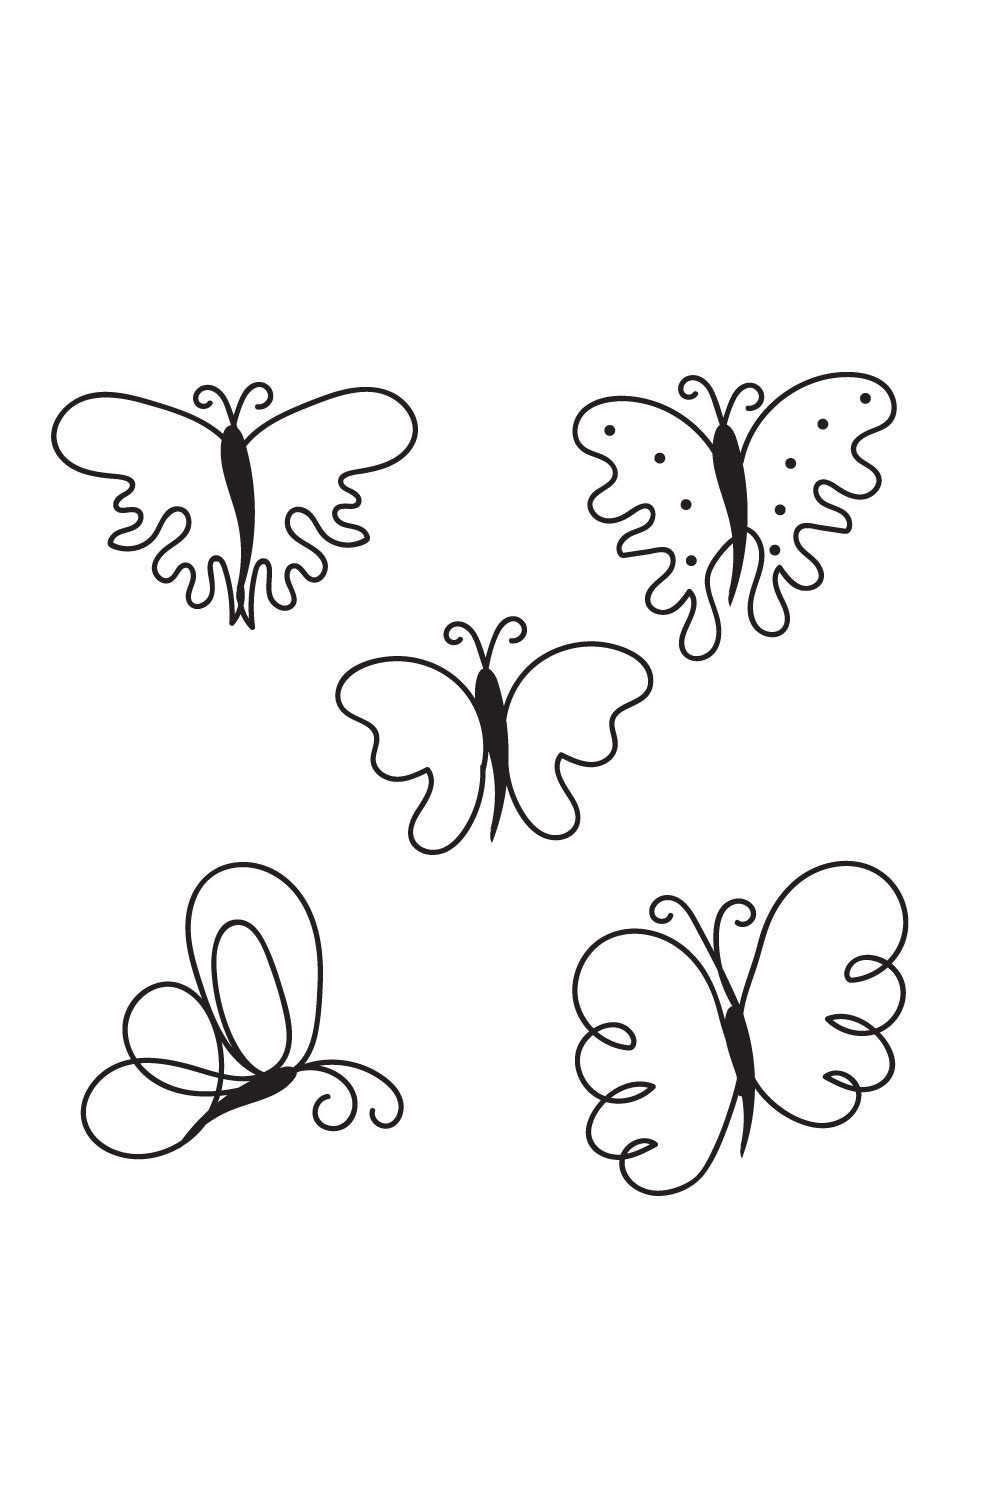 Set of four butterflies on a white background.